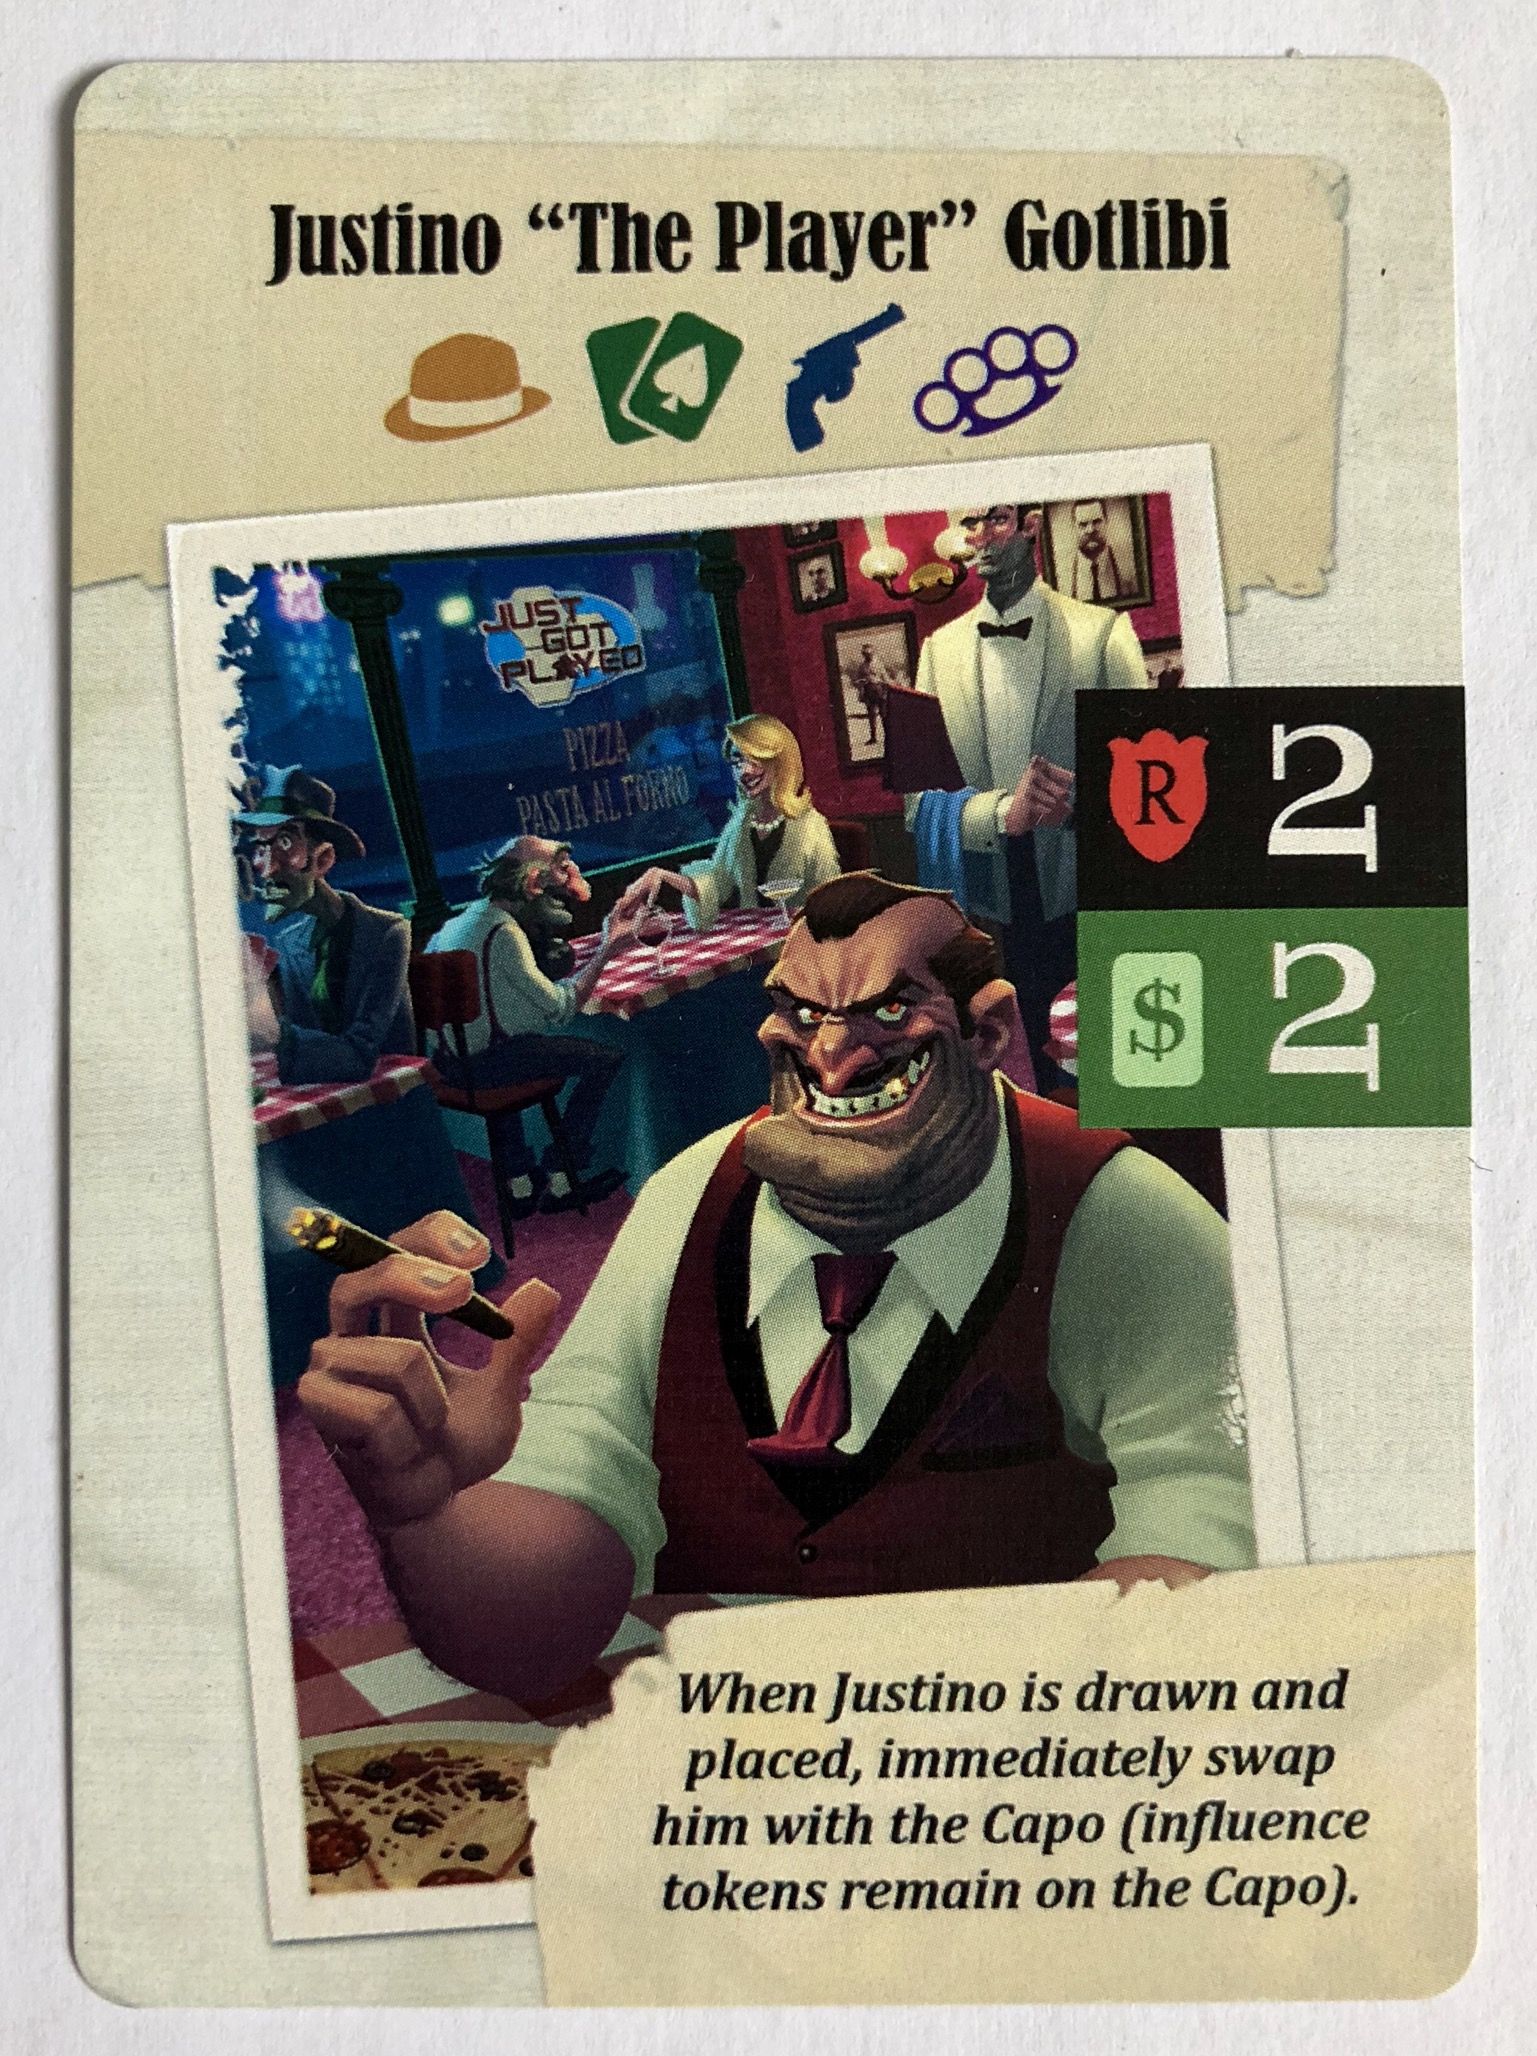 Nothing Personal: Justino "The Player" Gotlibi Promo Card